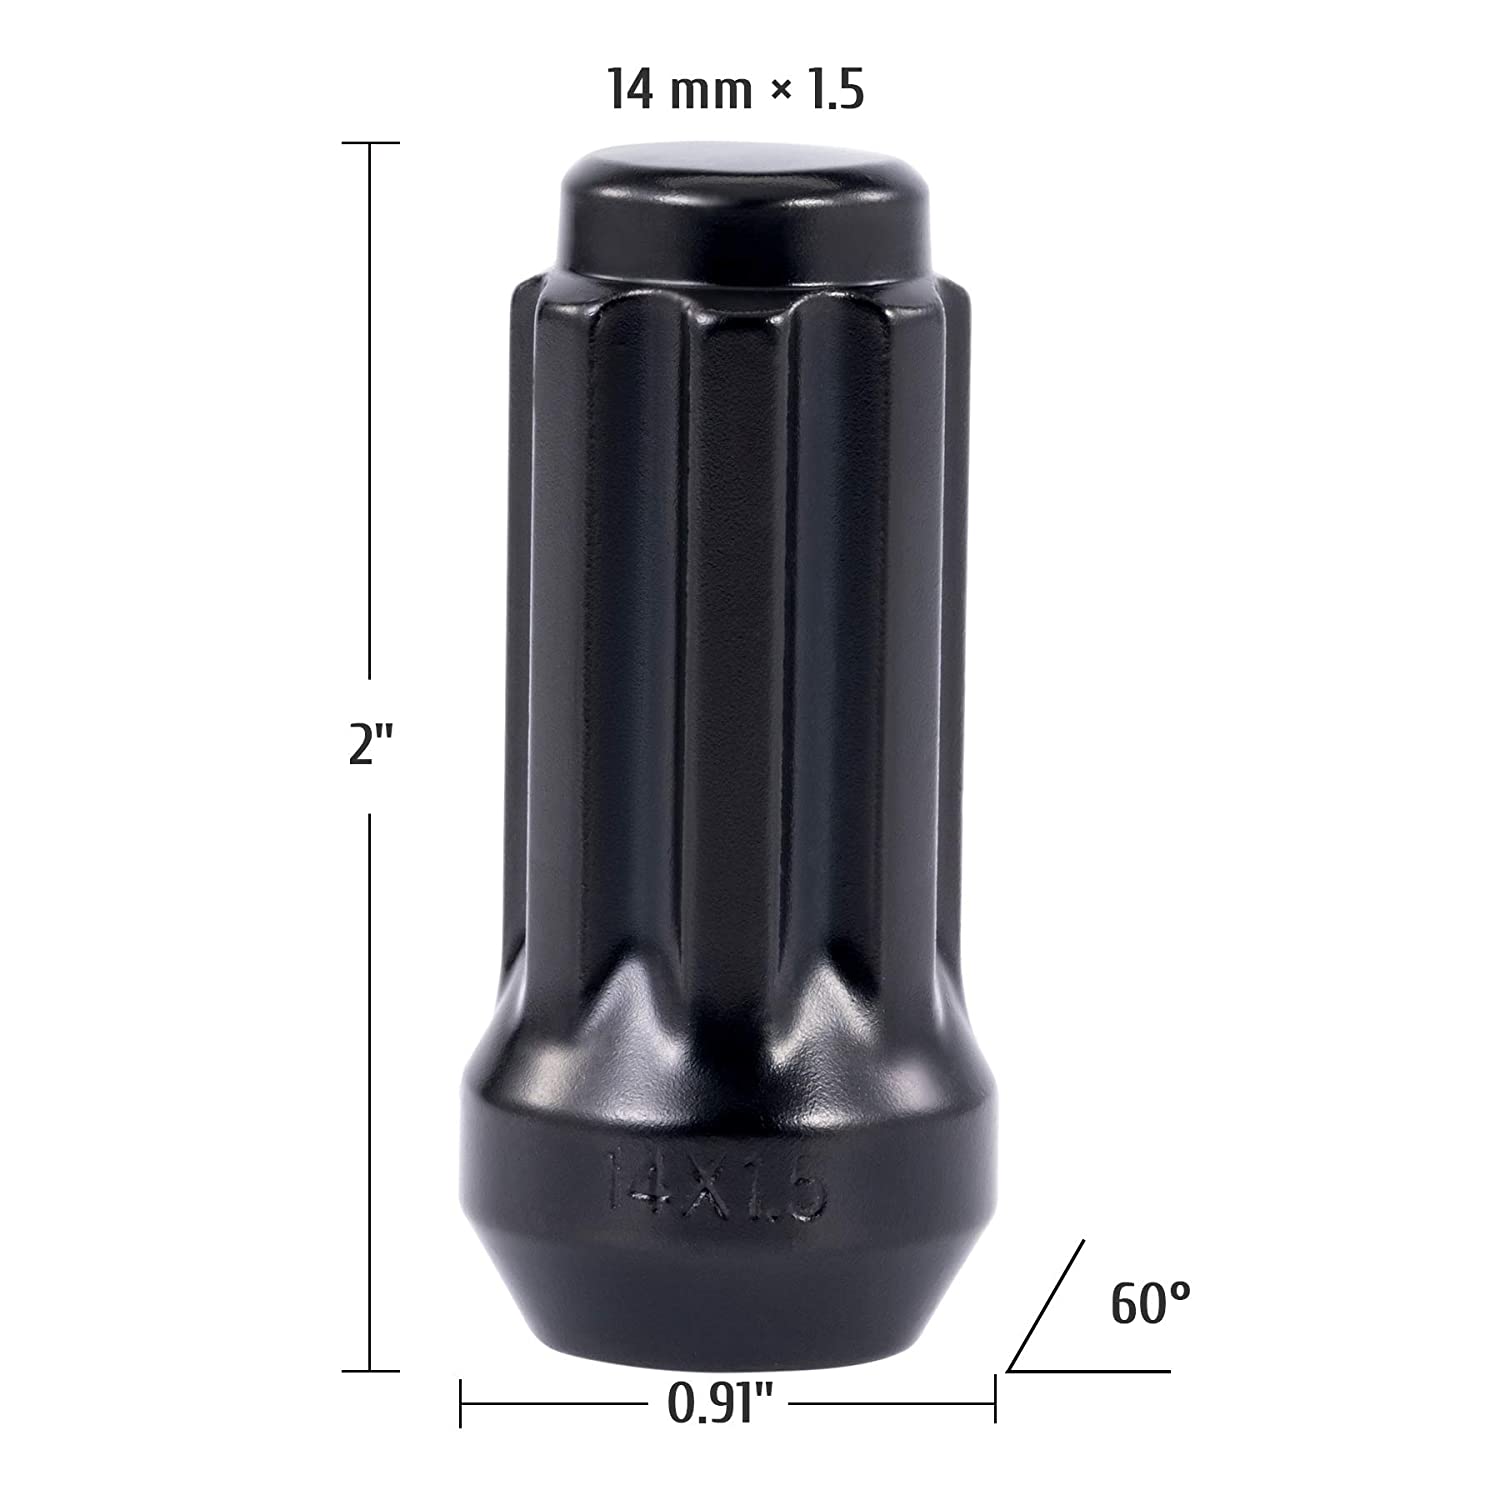 M14x1.5 Lug Nuts Spline Drive with 60 degree Cone Seat OMT –  OrionMotorTech